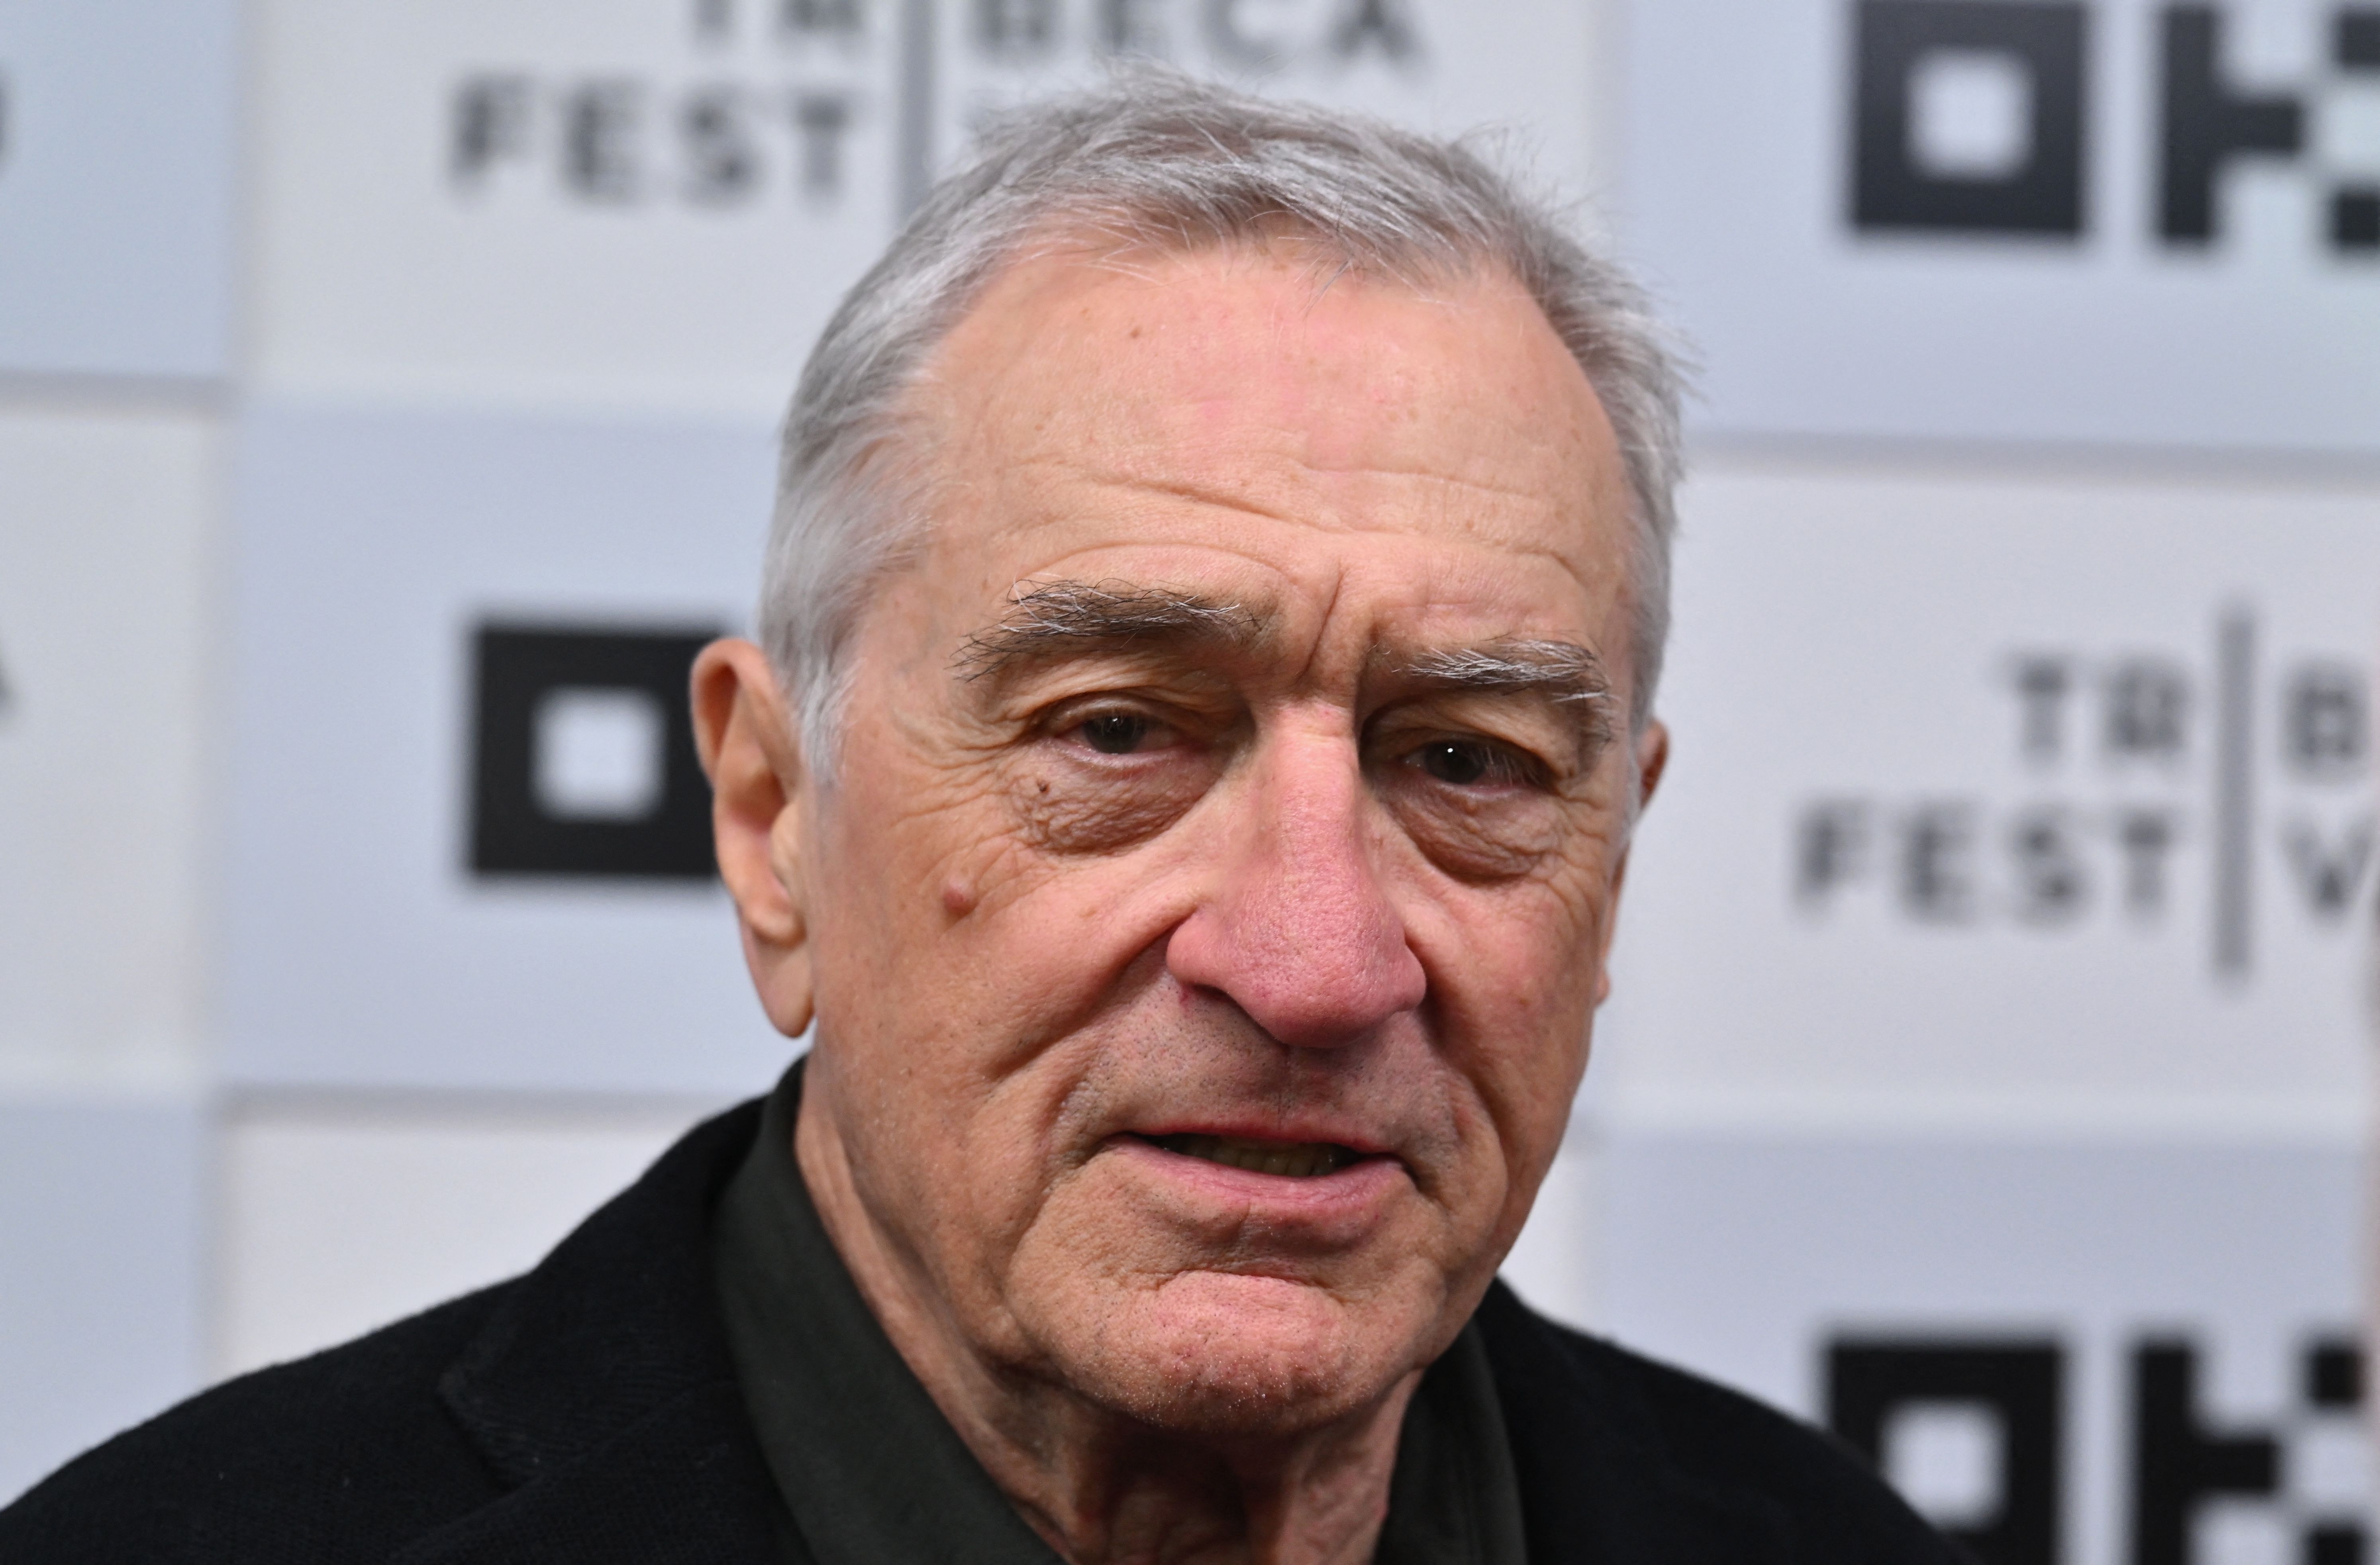 Robert De Niro at the screening of "Kiss the Future" during the opening night of the Tribeca Film Festival at OKX Theater in New York City on June 7, 2023. | Source: Getty Images